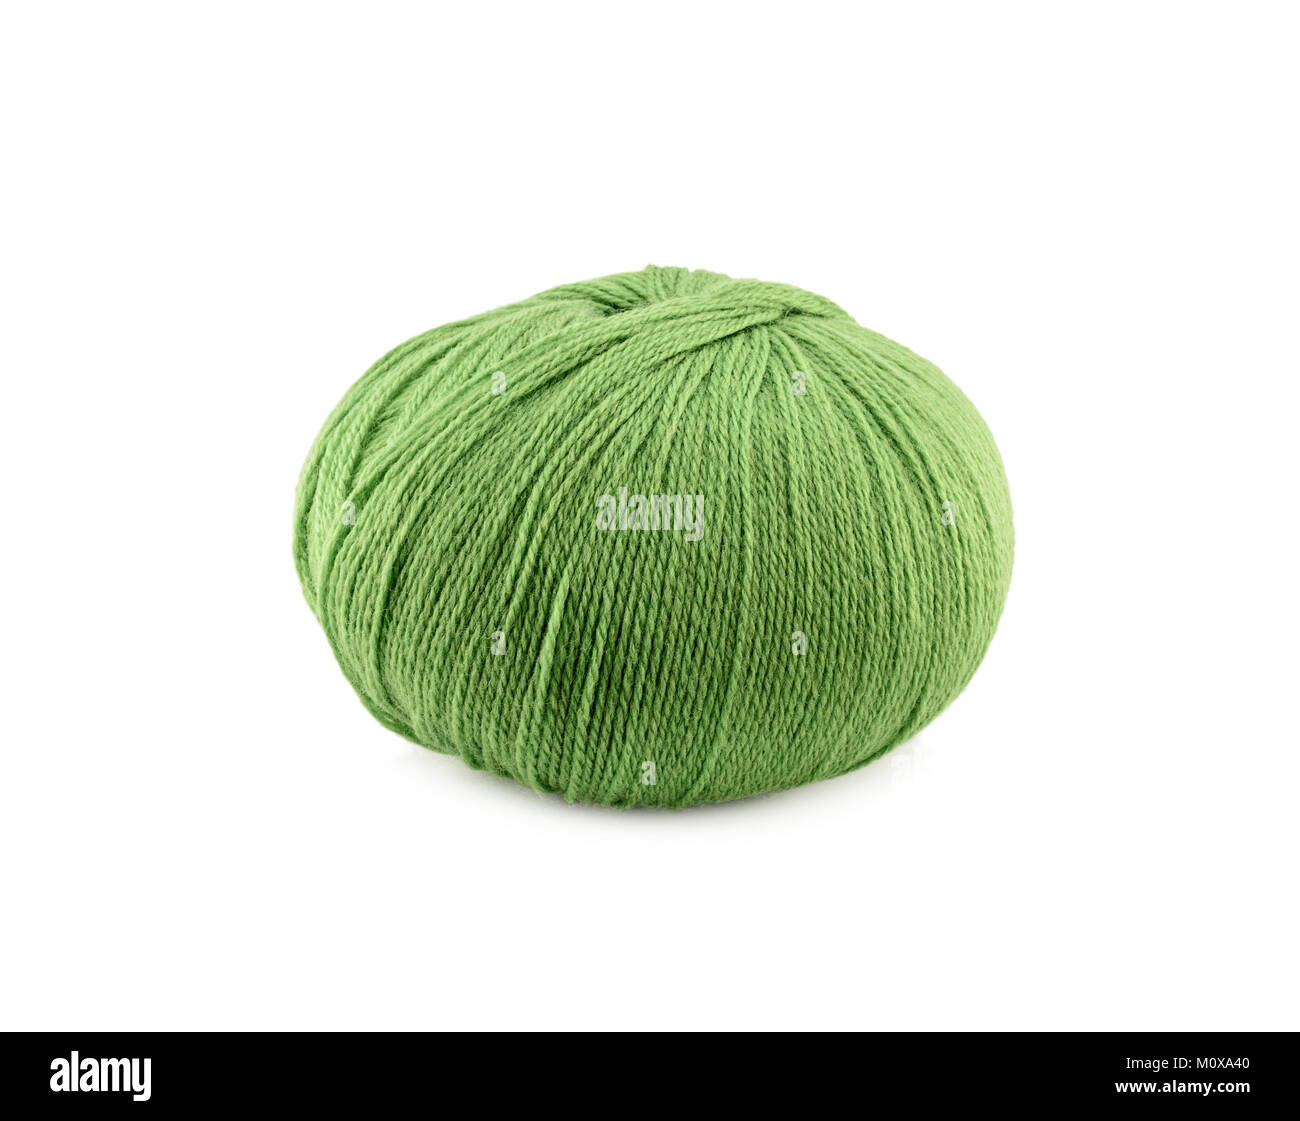 Yarn of wool for knitting on white background. Green, pink, blue, purple  tangle. Needlework, handmade. Isolated. Copy space Stock Photo - Alamy